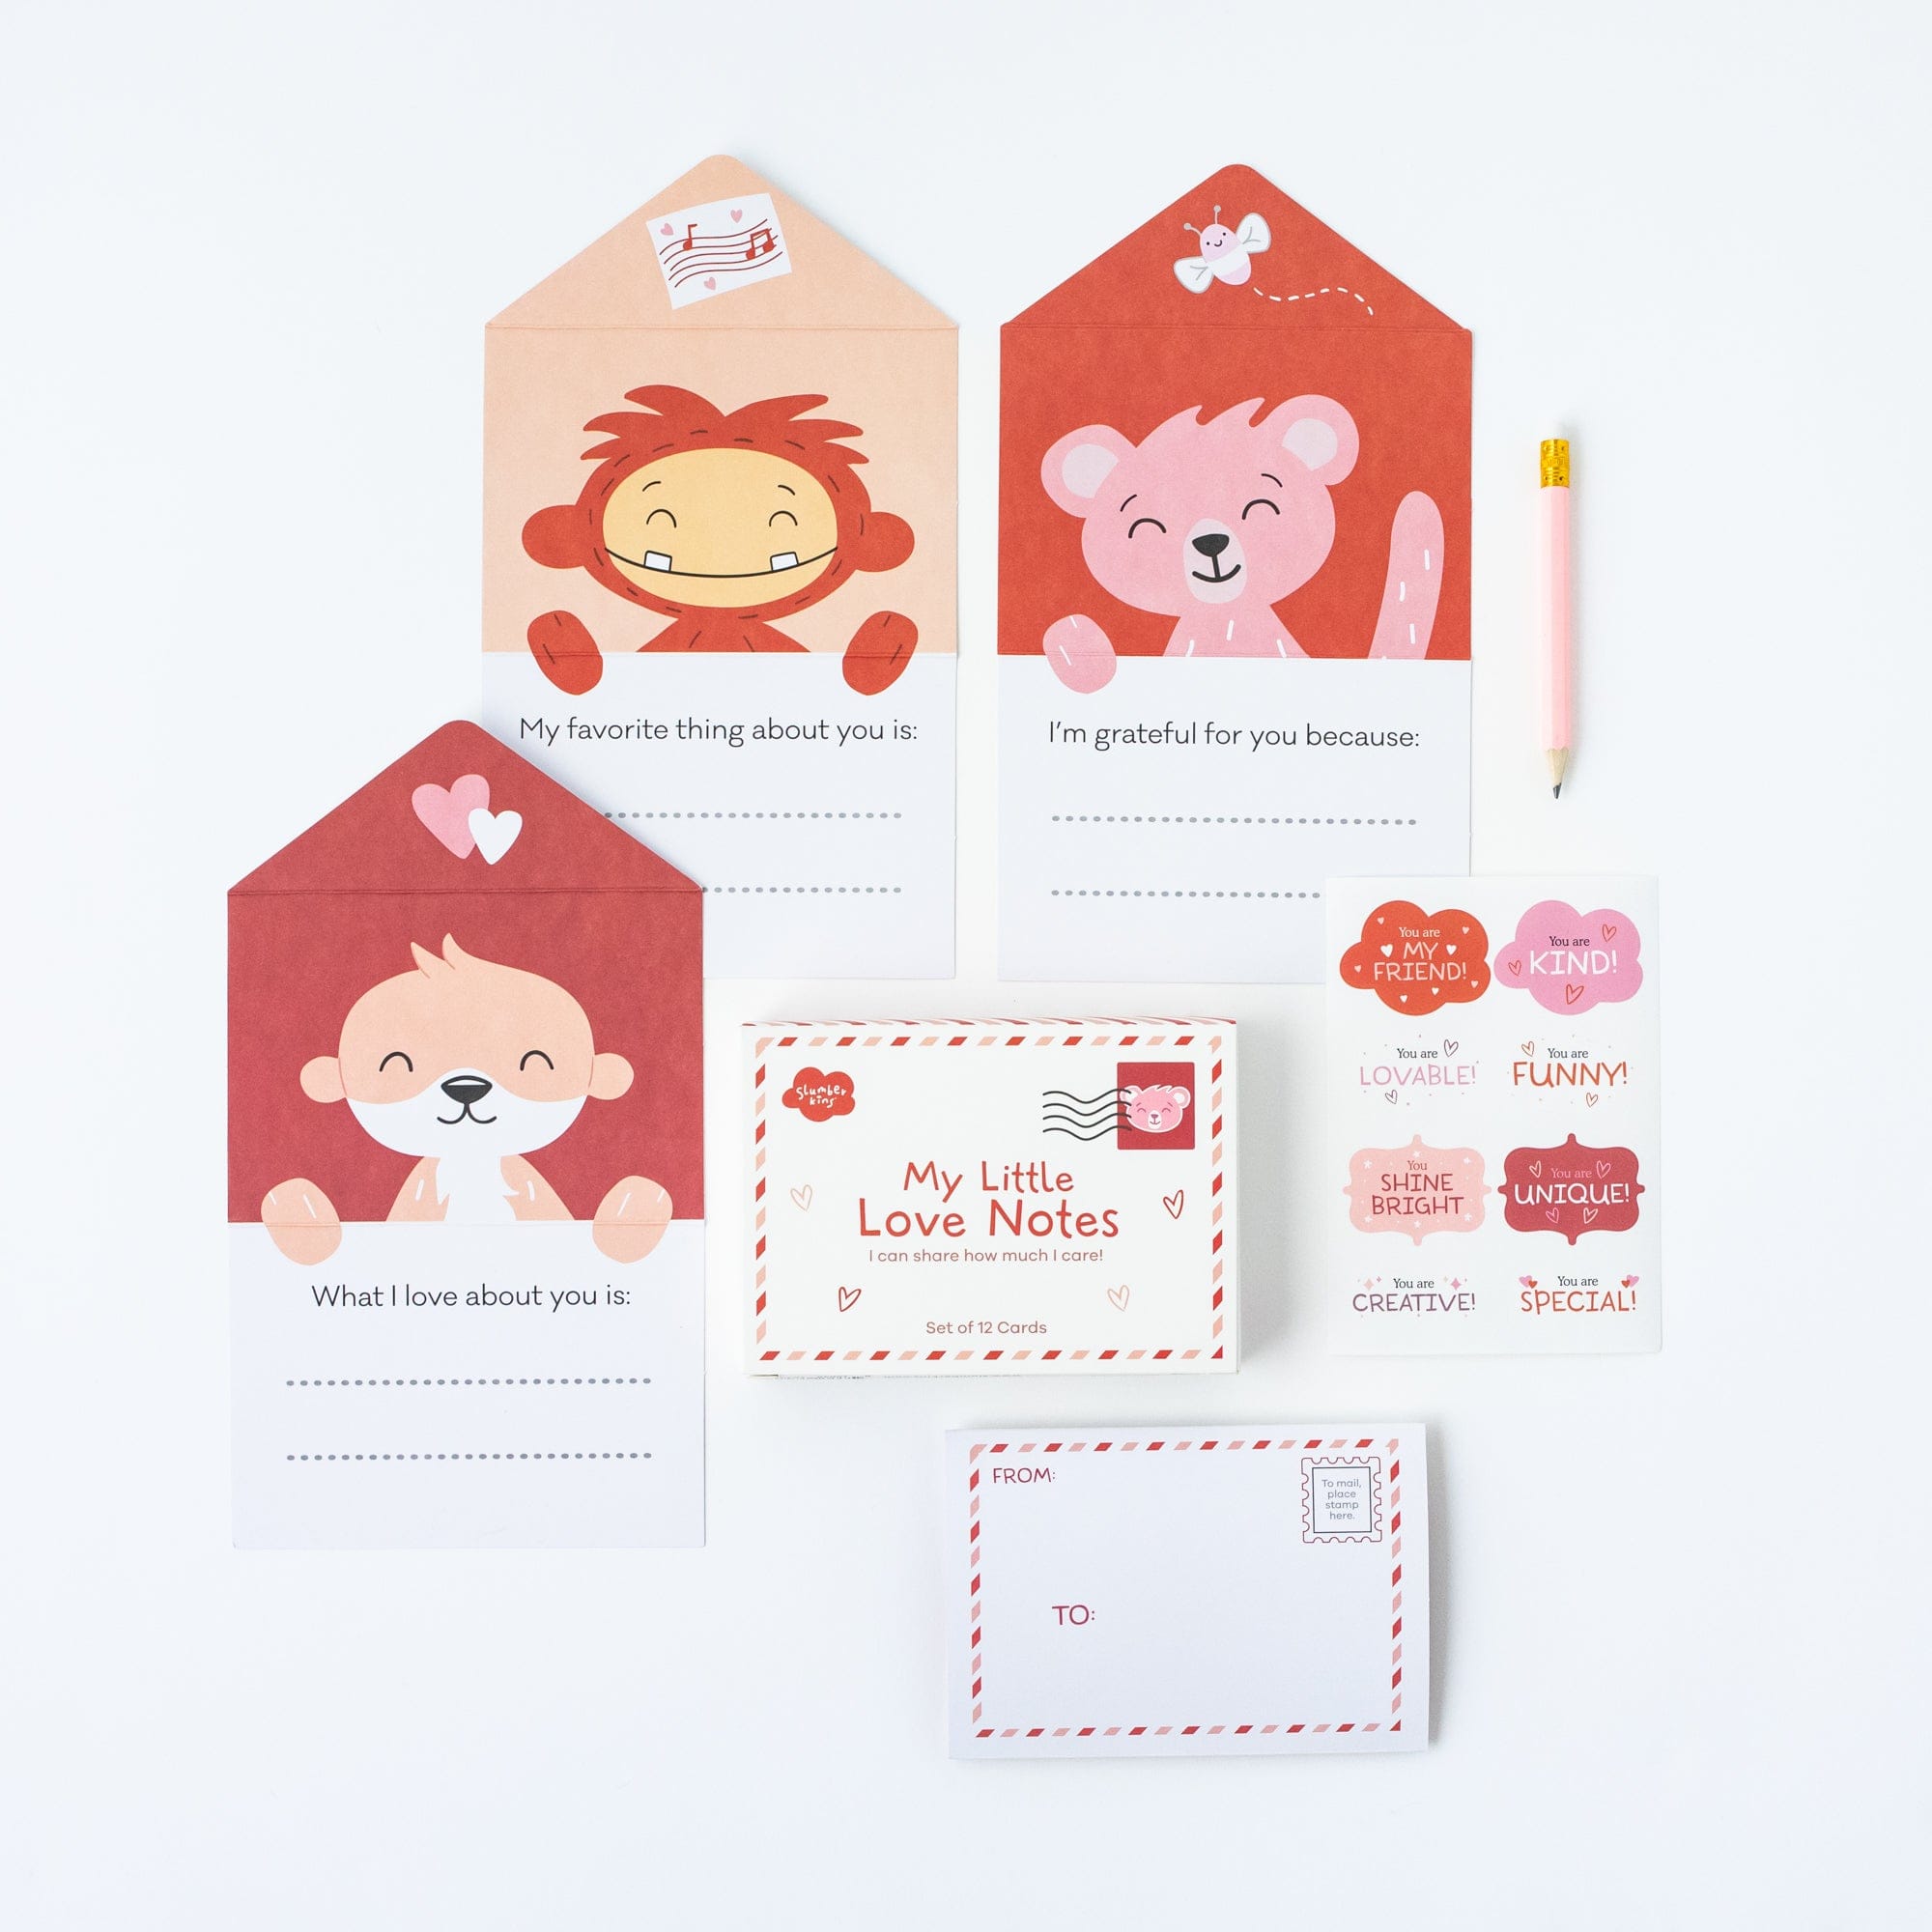 My Little Love Notes - View Product